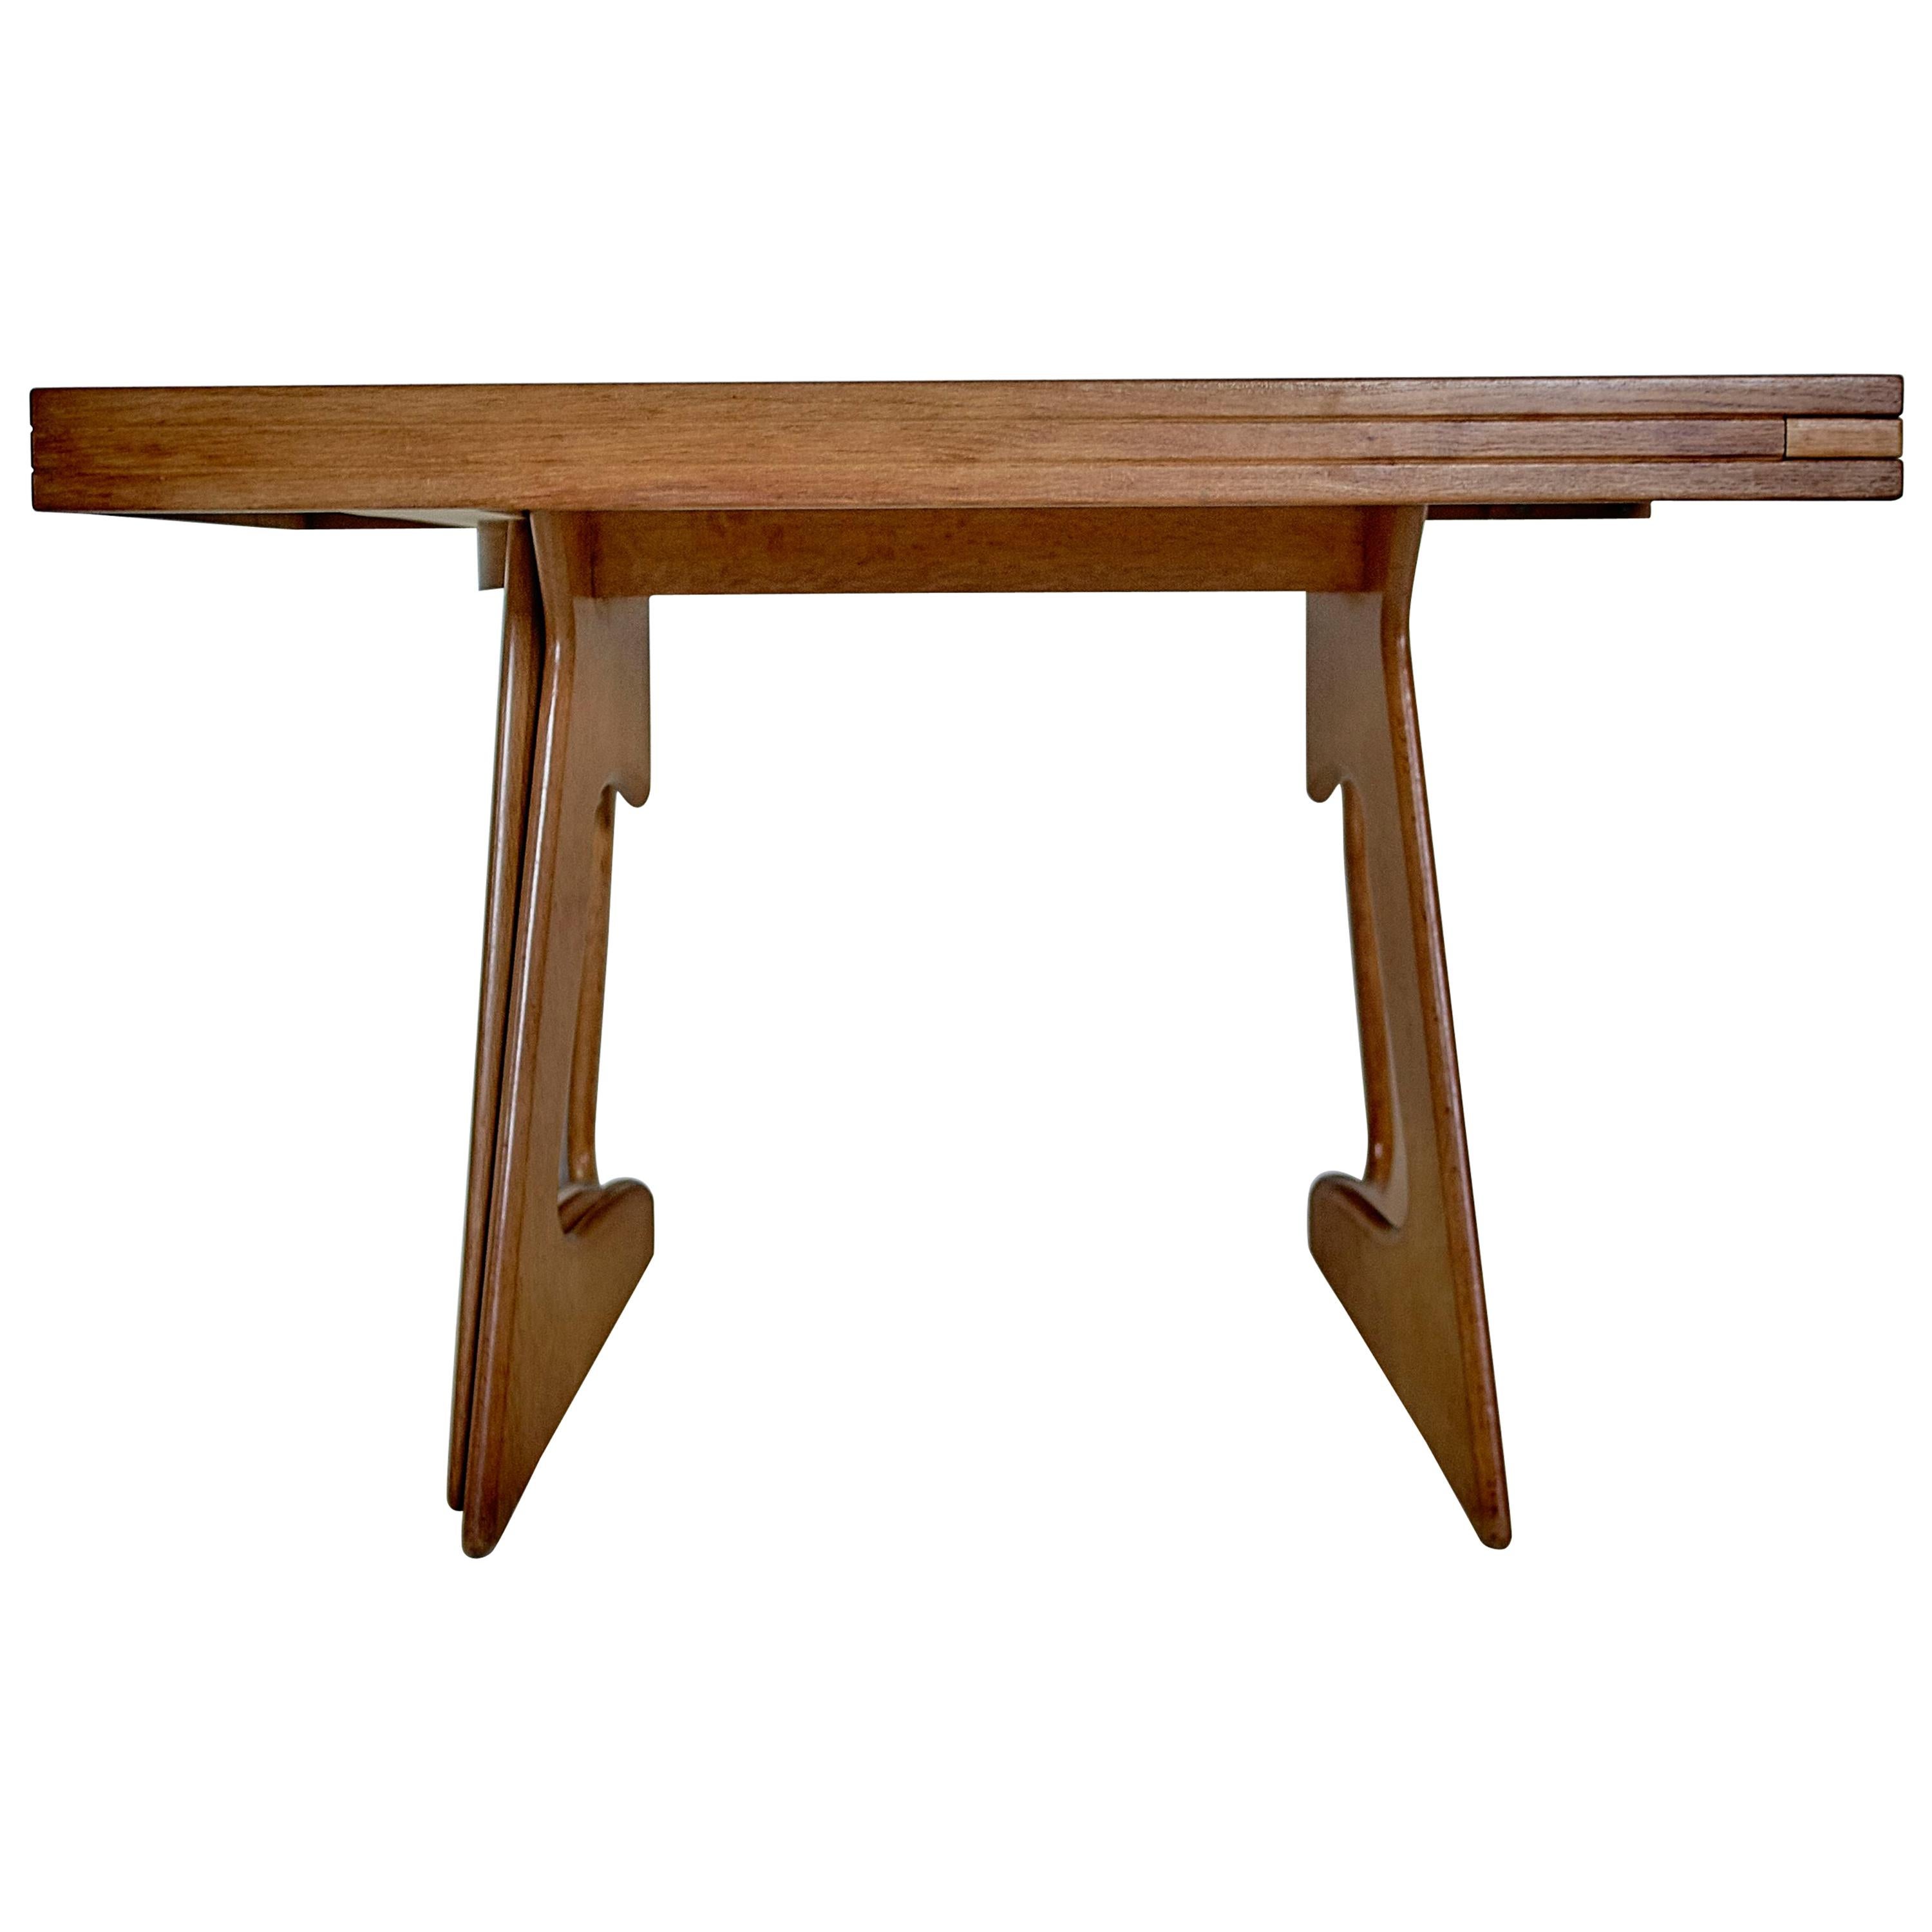 Guillerme & Chambron Solid Oak and Marquetry Extendable Dining Table, 1960 For Sale